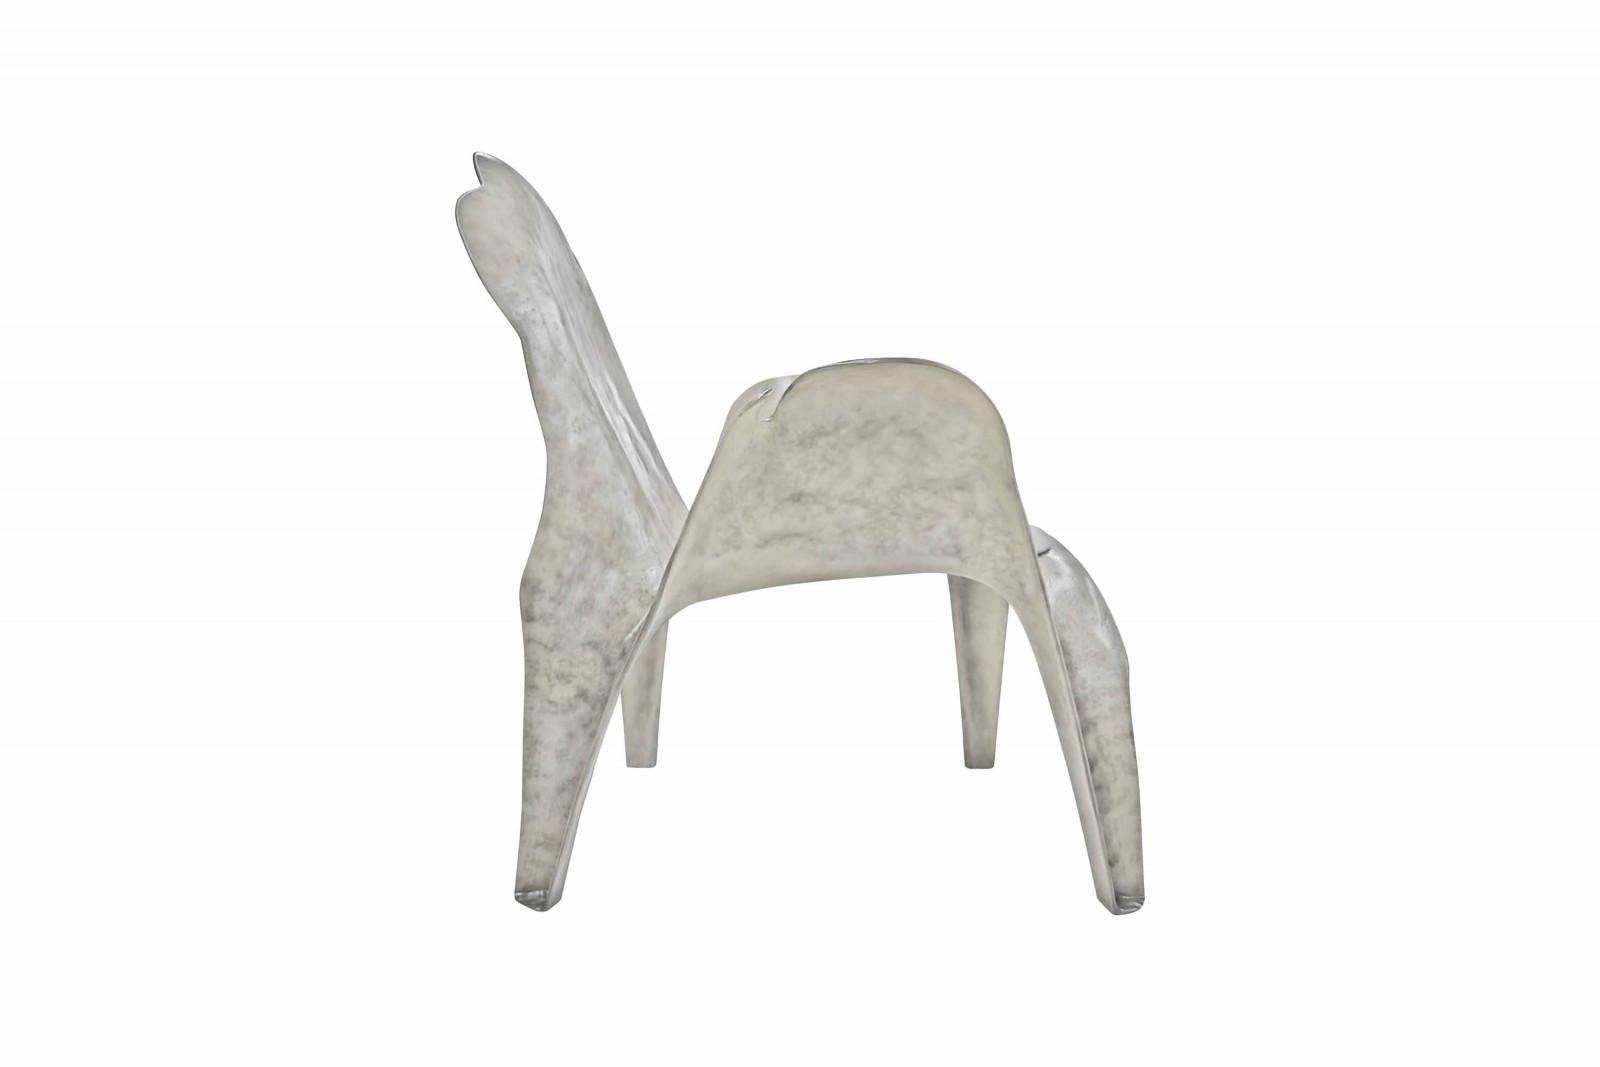 Portuguese Outdoor Biomorphic Dining Chair in Matte White Finish For Sale